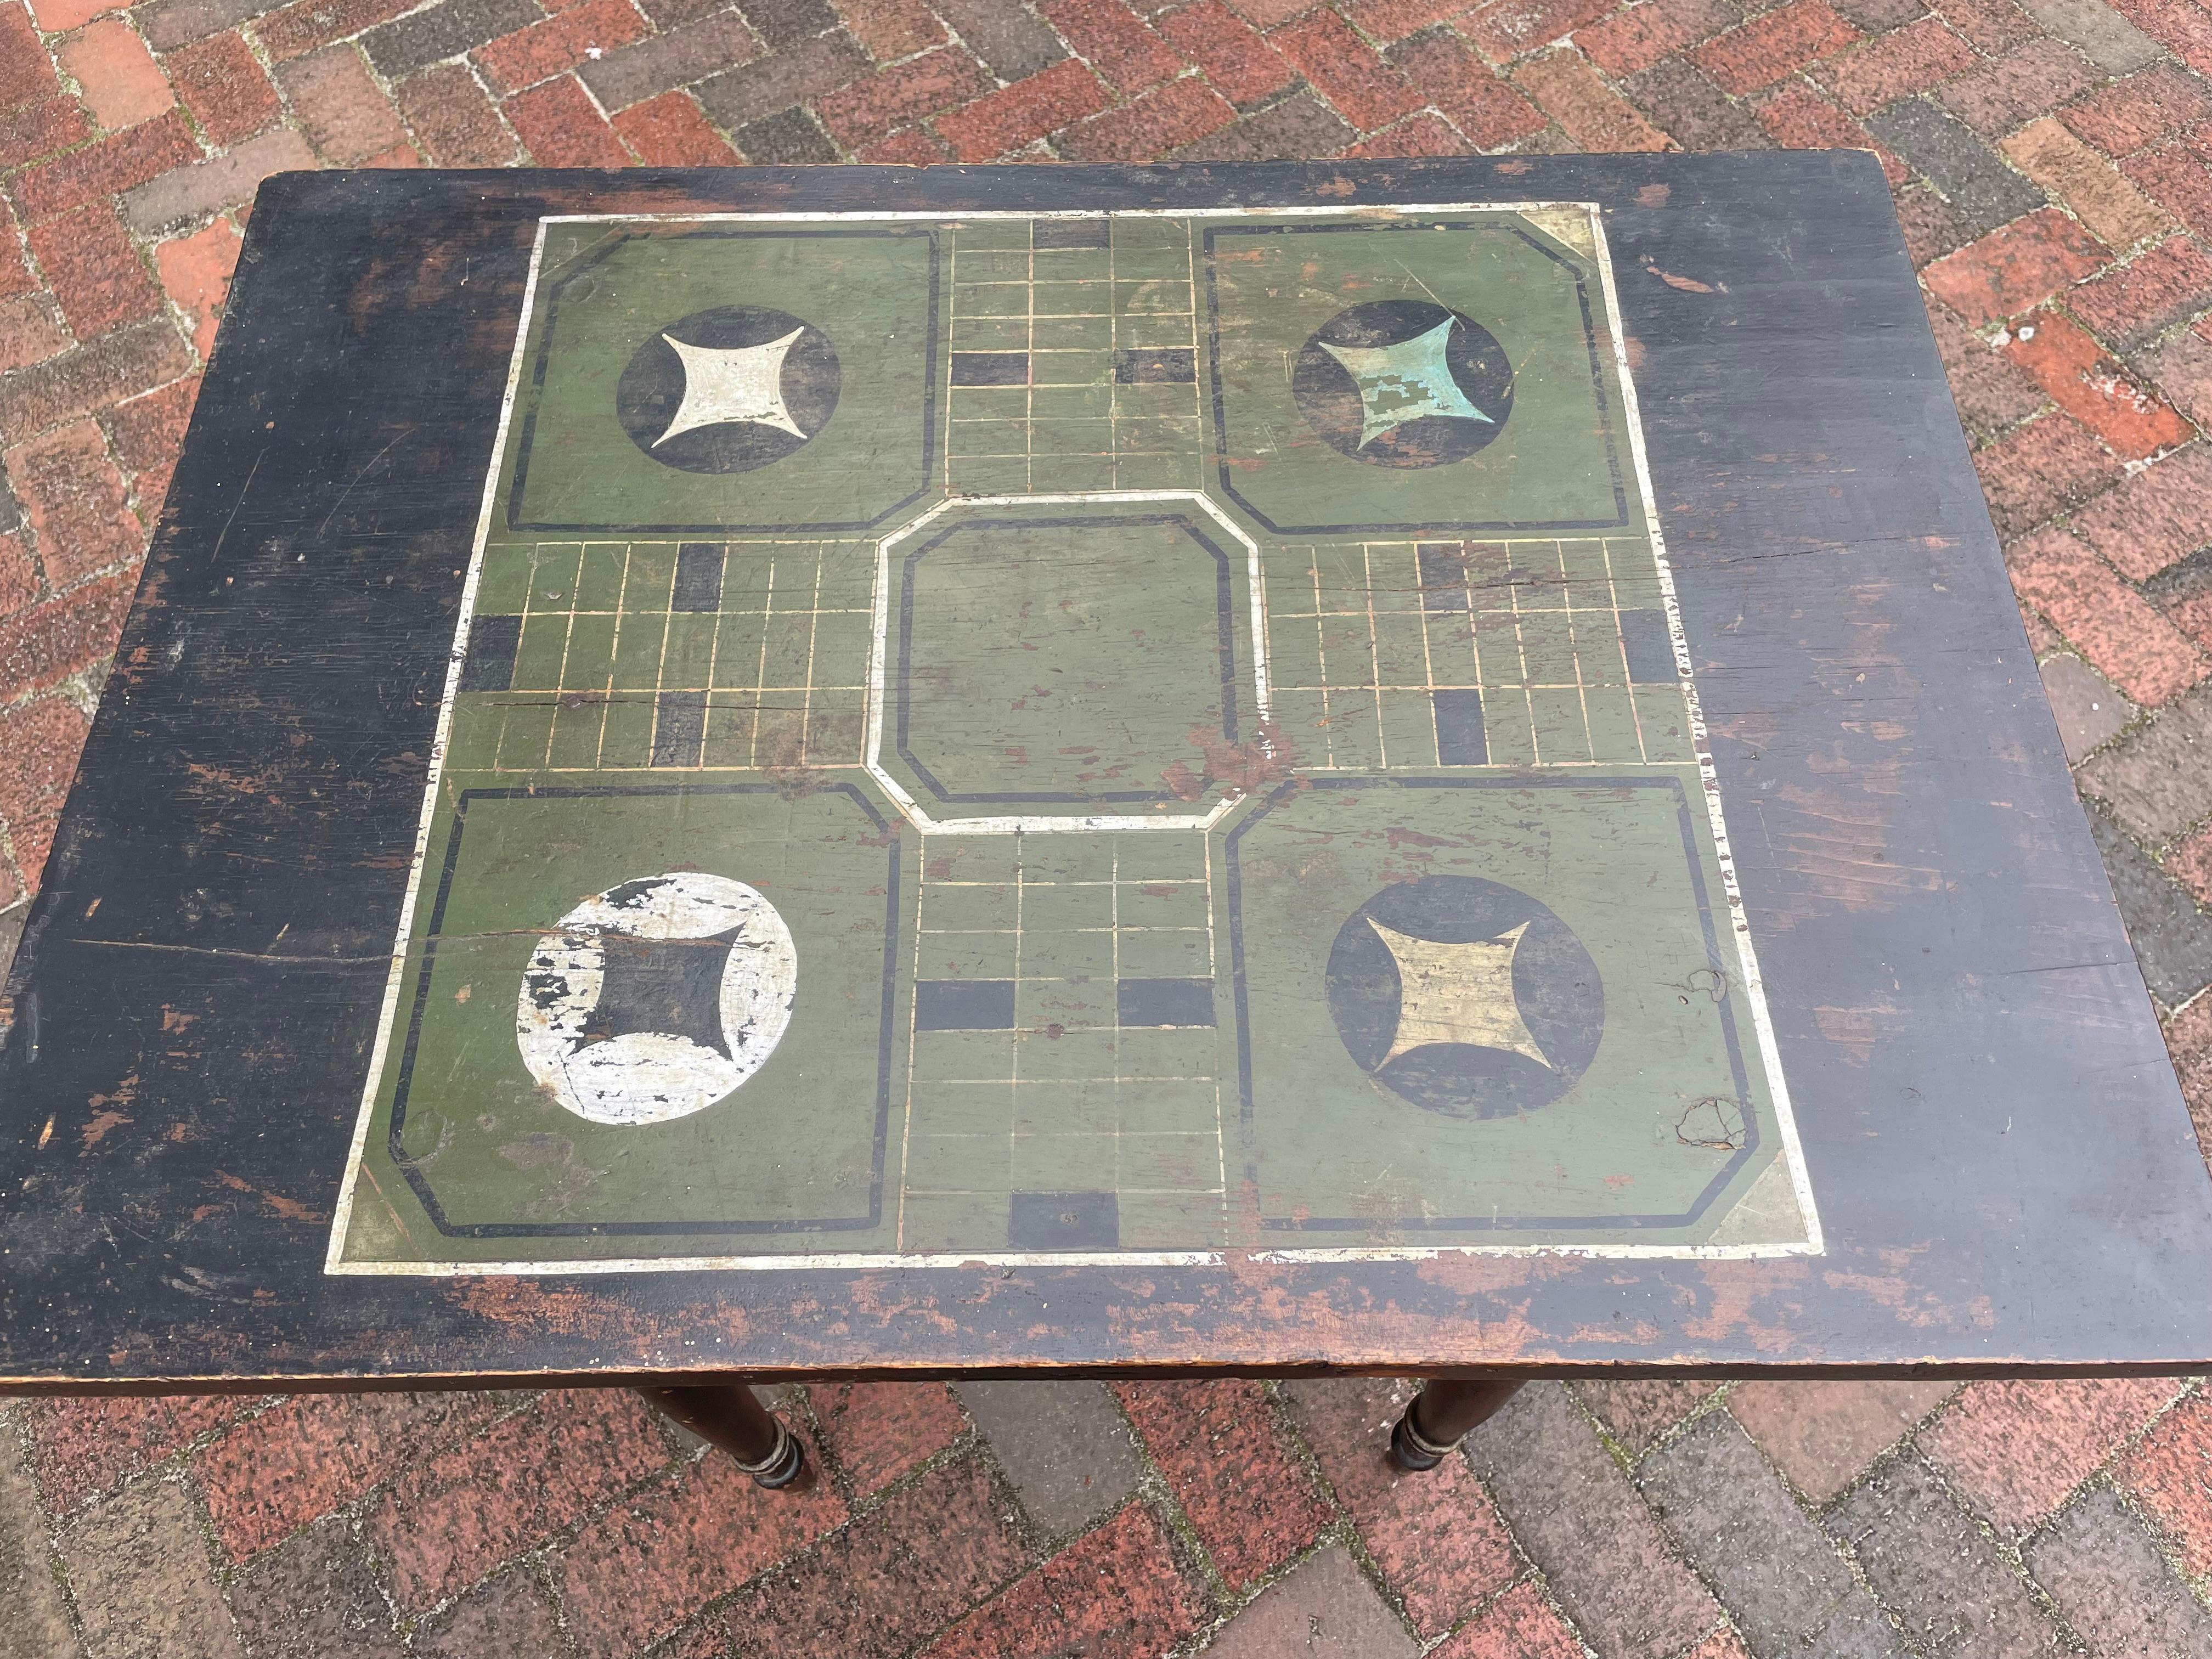 Lovely Turn of the Century Parcheesi Game/Side Table. In all over black paint with green and polychrome painted Parcheesi board pattern on single board top. Base with turned, tapered legs highlighted with gold and silver decorative paint throughout.